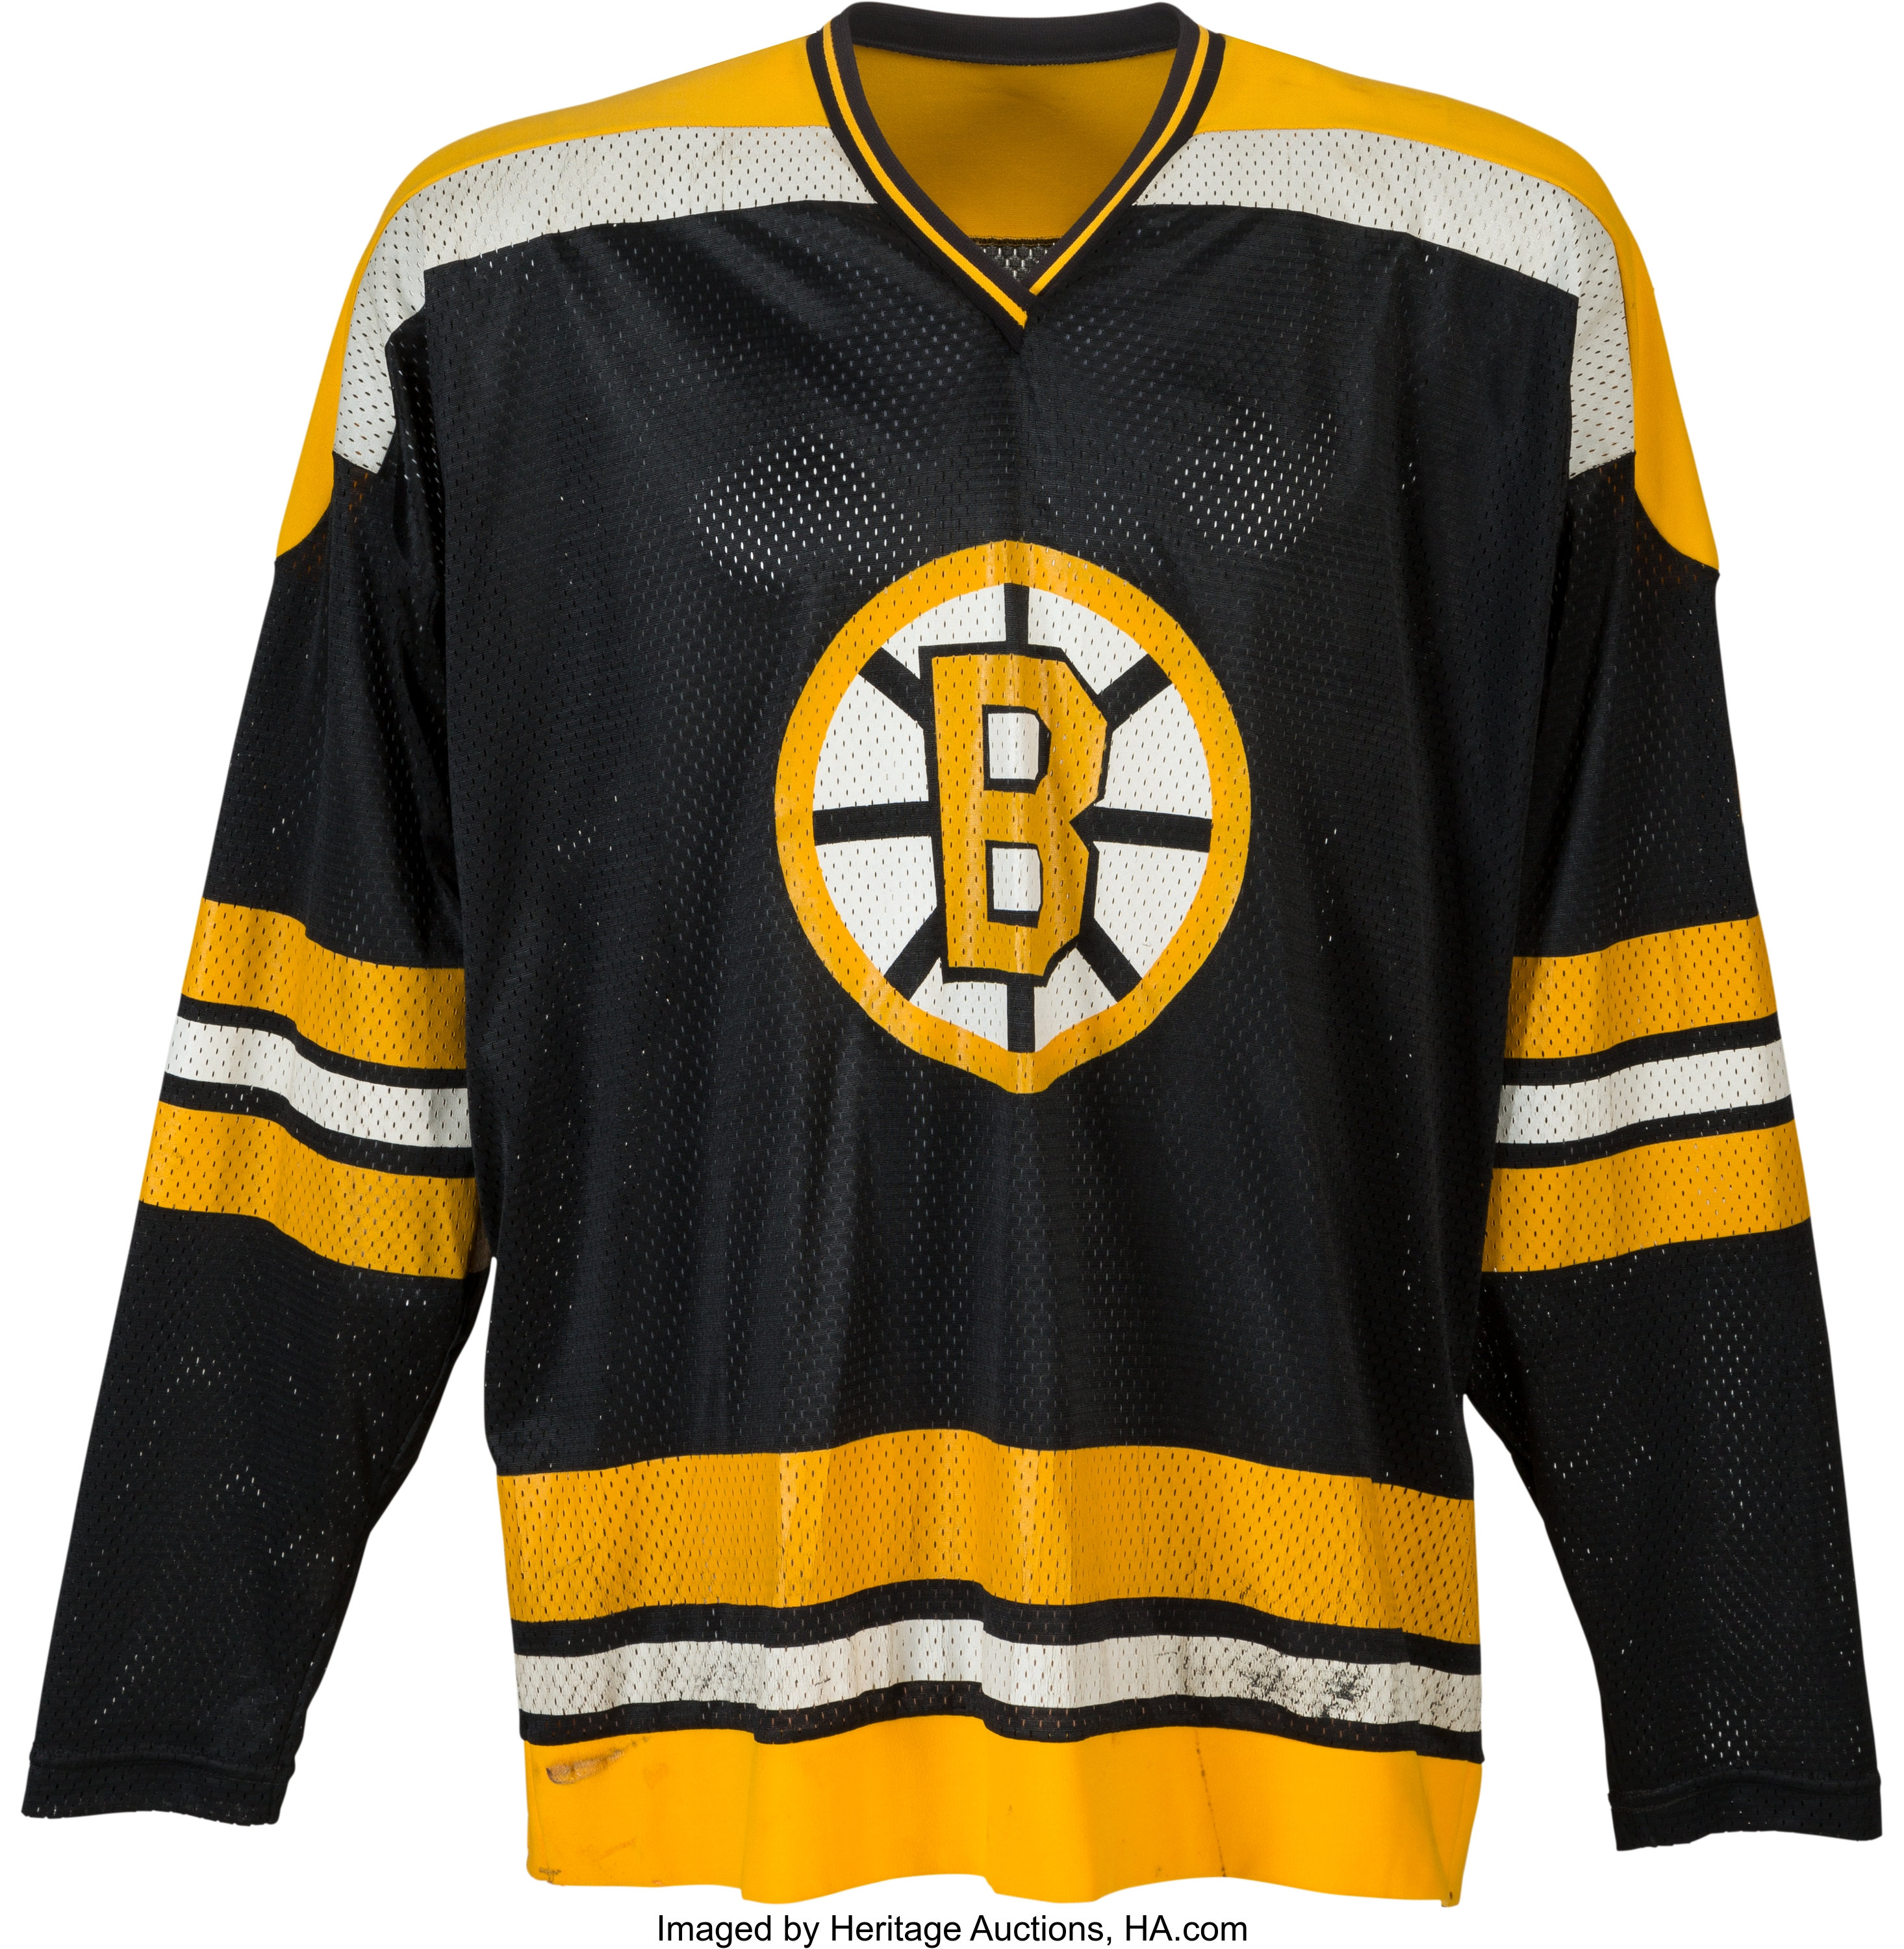 Bobby Orr Jersey Essential T-Shirt for Sale by ktthegreat